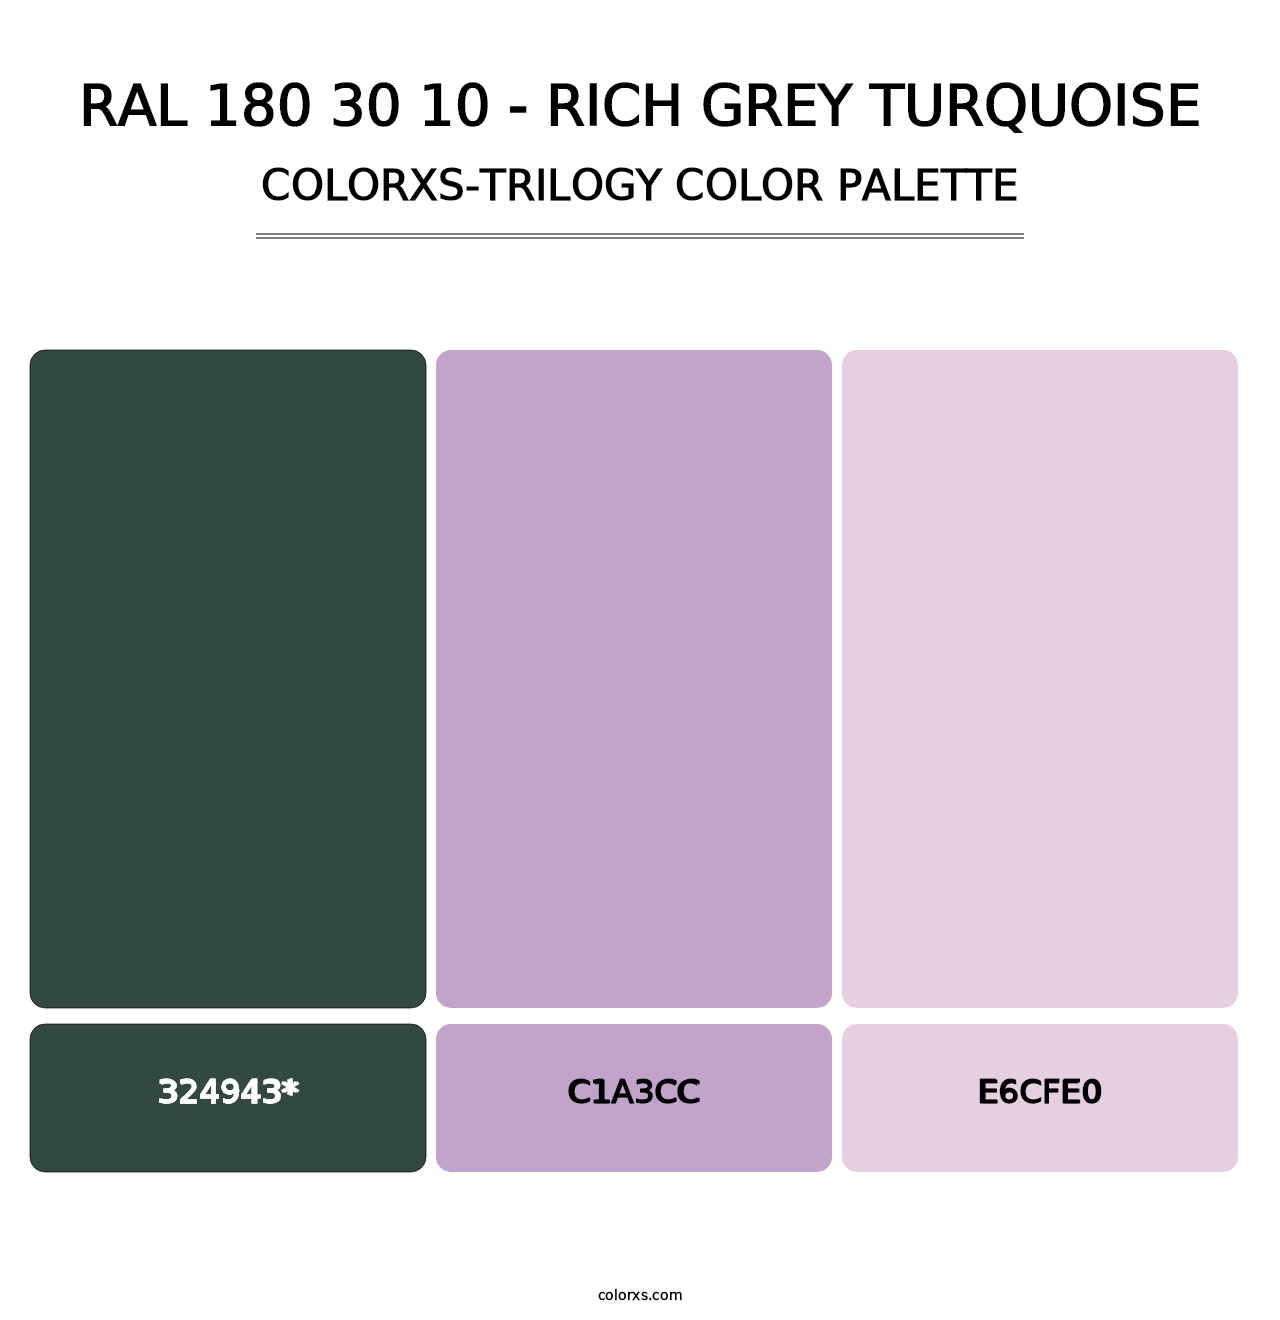 RAL 180 30 10 - Rich Grey Turquoise - Colorxs Trilogy Palette